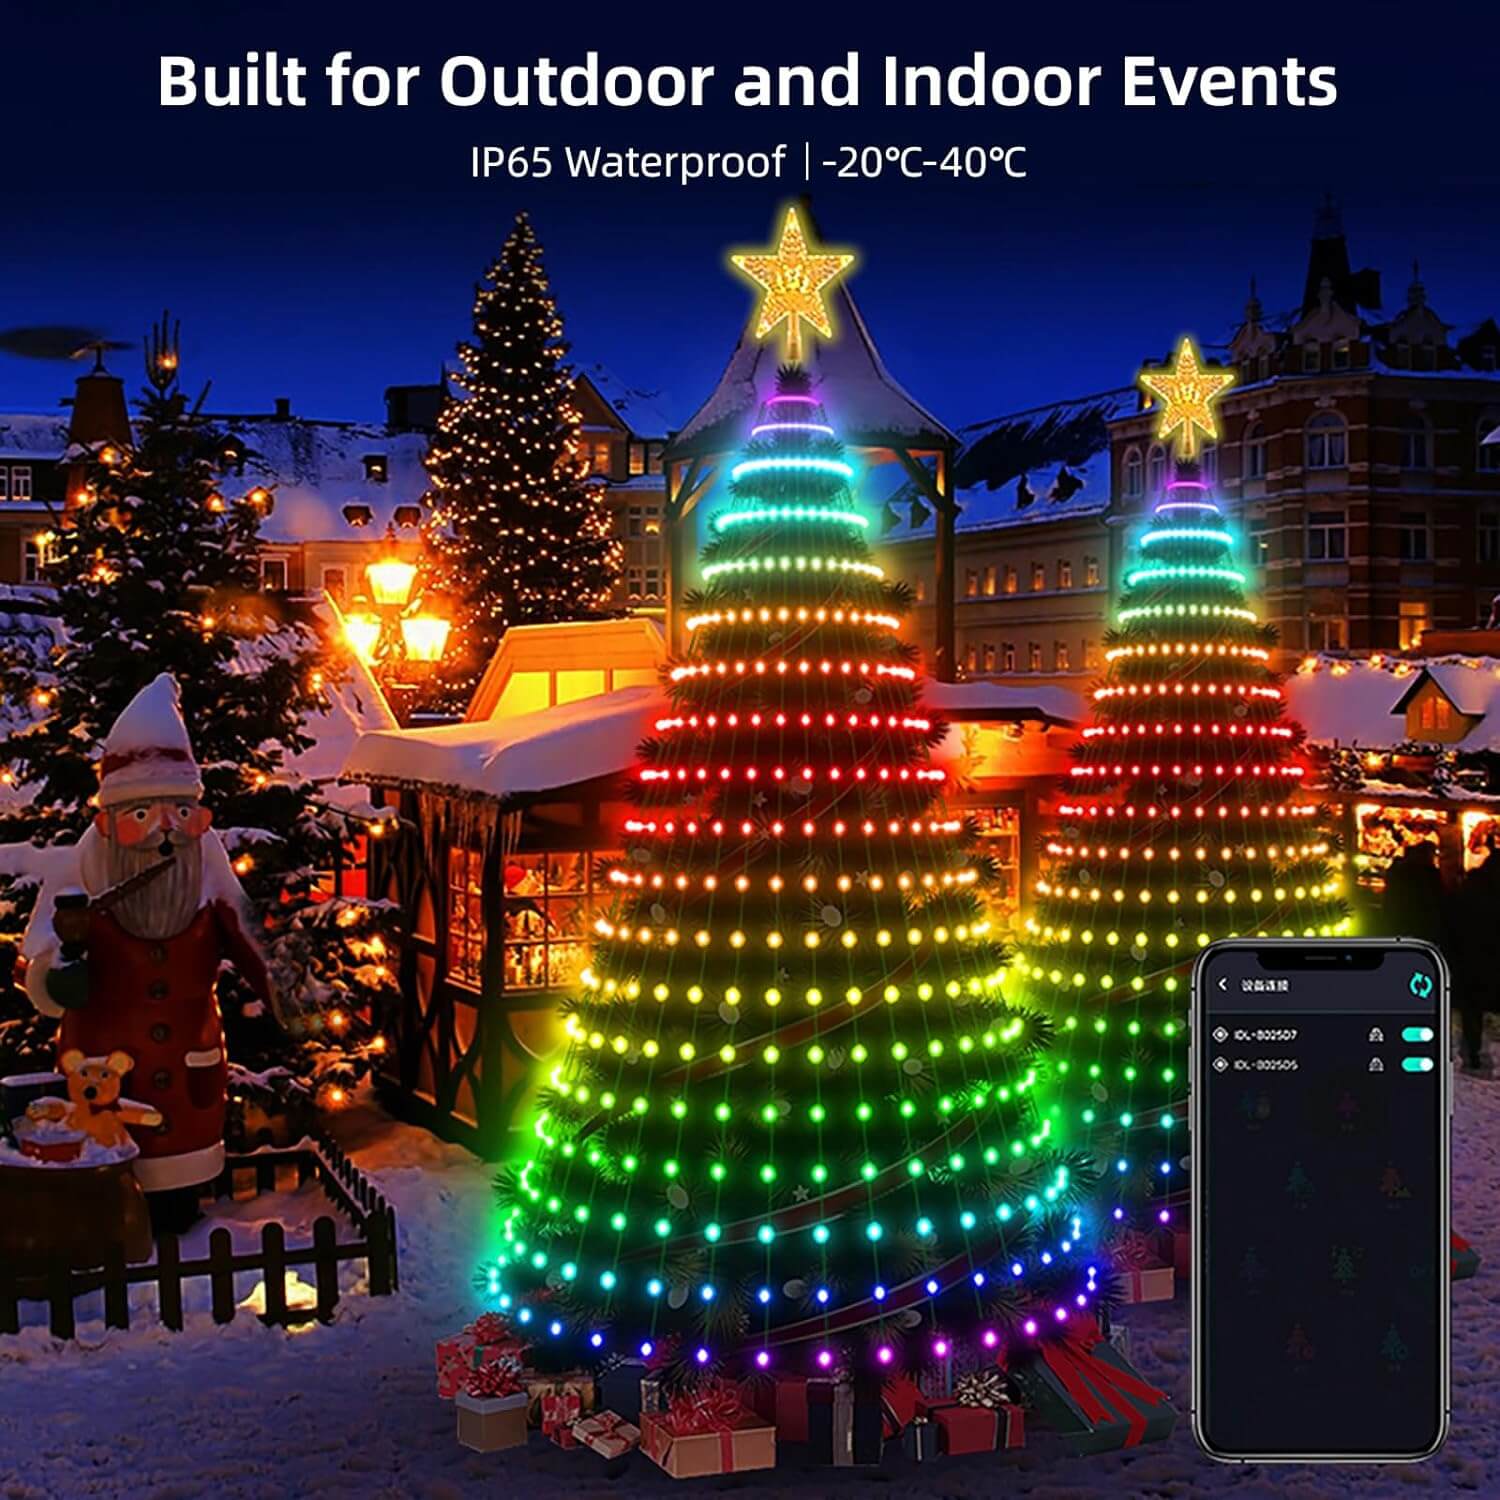 Our Smart Christmas Lights are IP65 weather-proof champions, resilient against the toughest winter conditions. Let them shine brightly, turning your home into a festive wonderland that can withstand whatever weather comes its way.